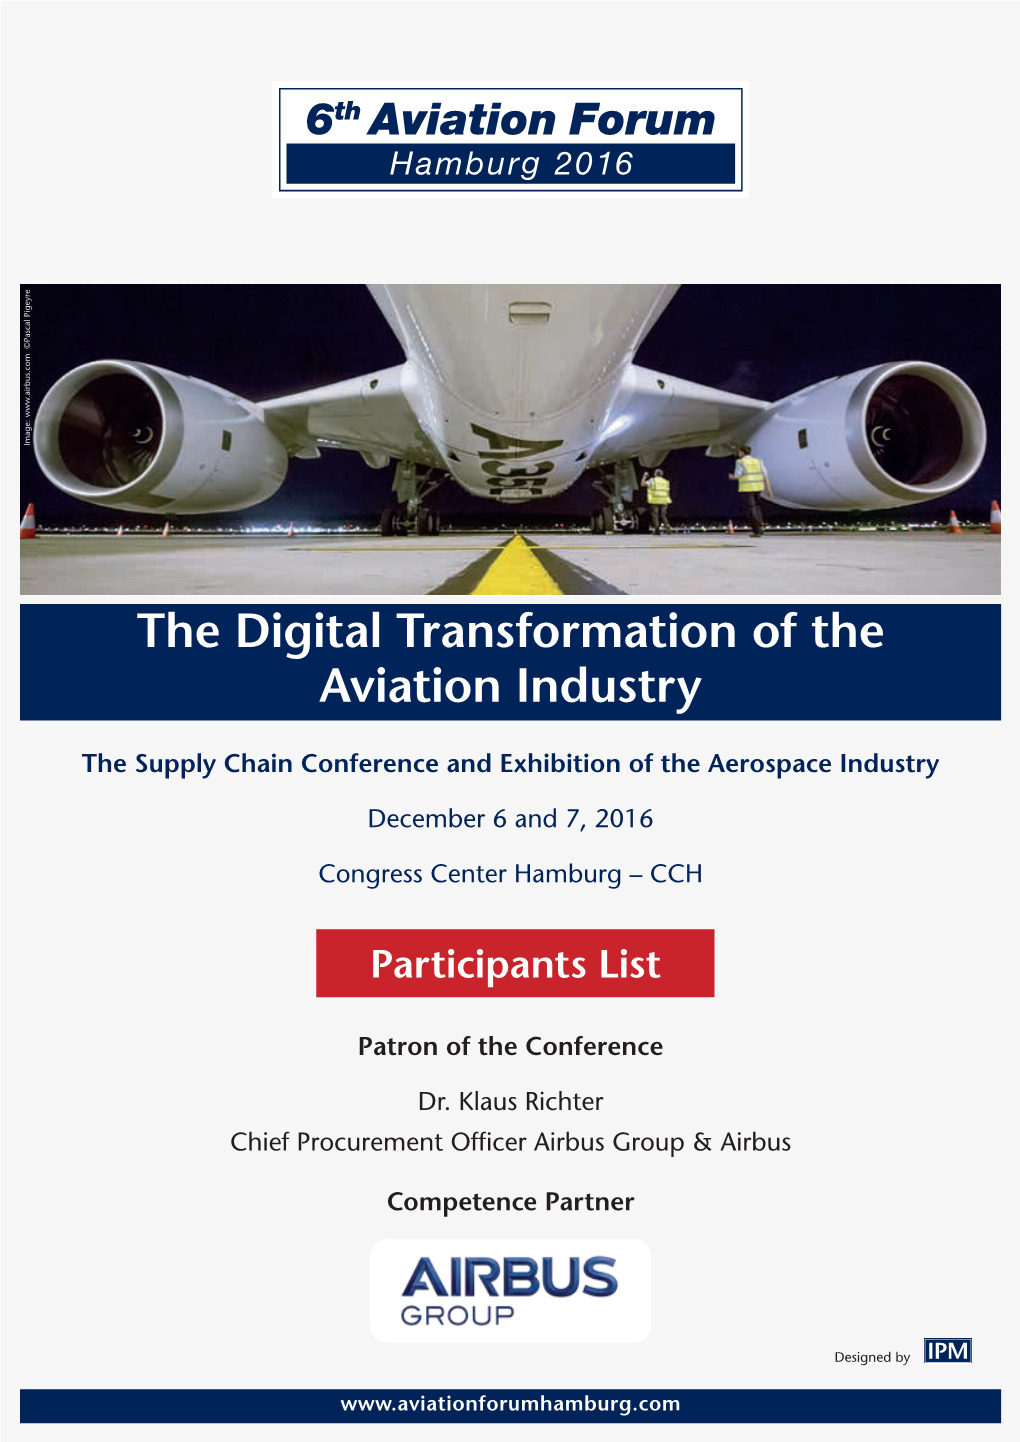 The Digital Transformation of the Aviation Industry